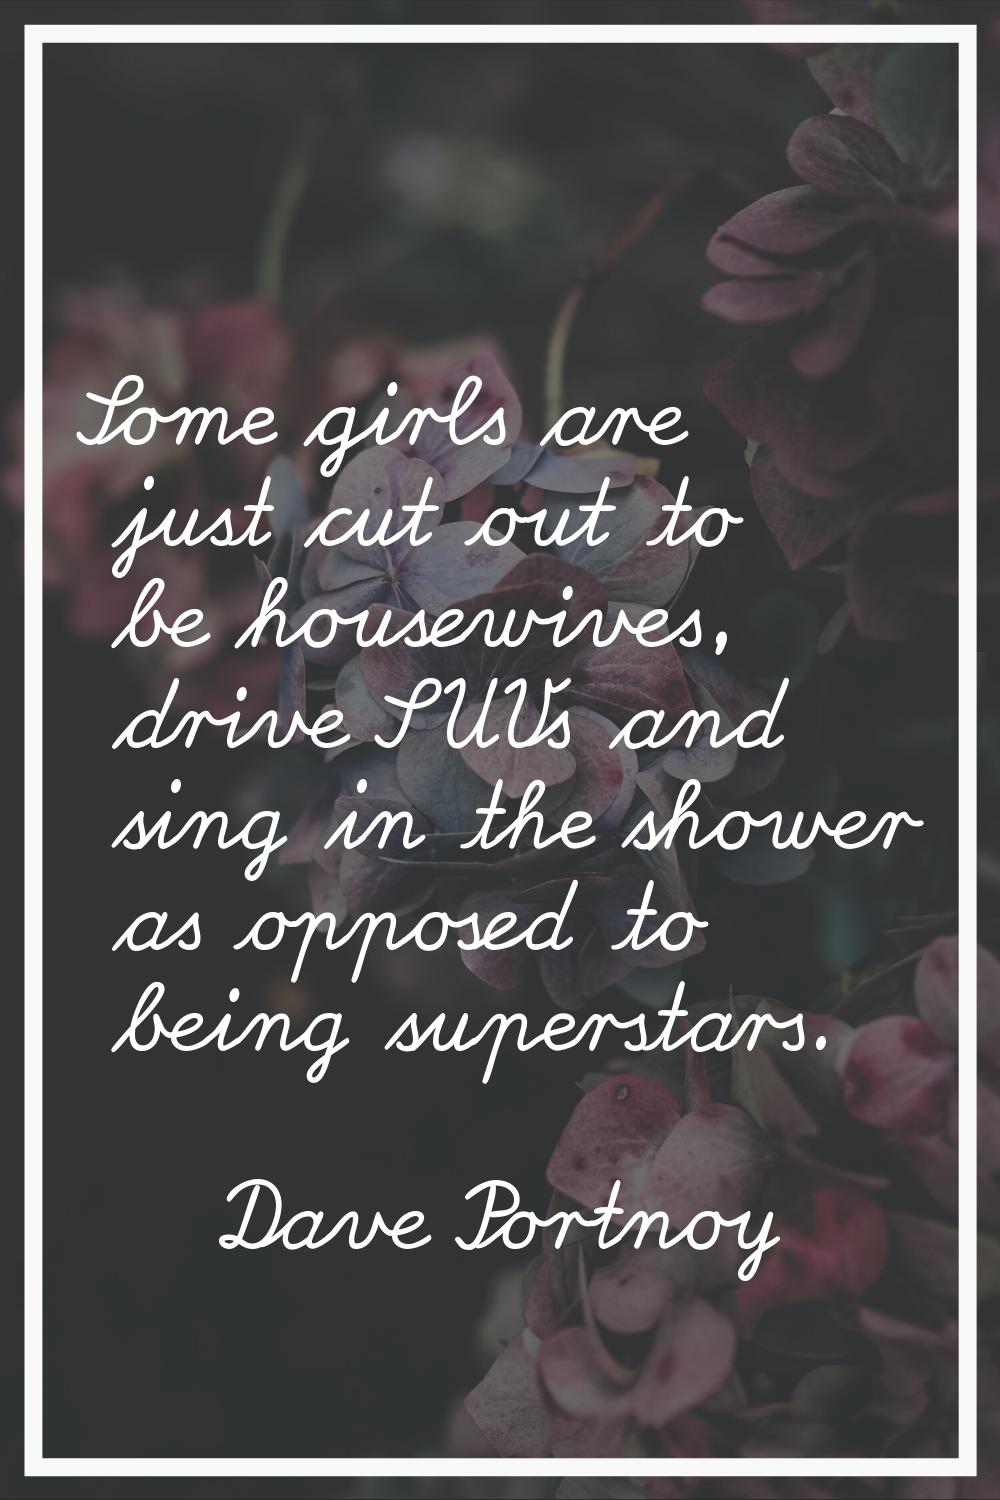 Some girls are just cut out to be housewives, drive SUVs and sing in the shower as opposed to being